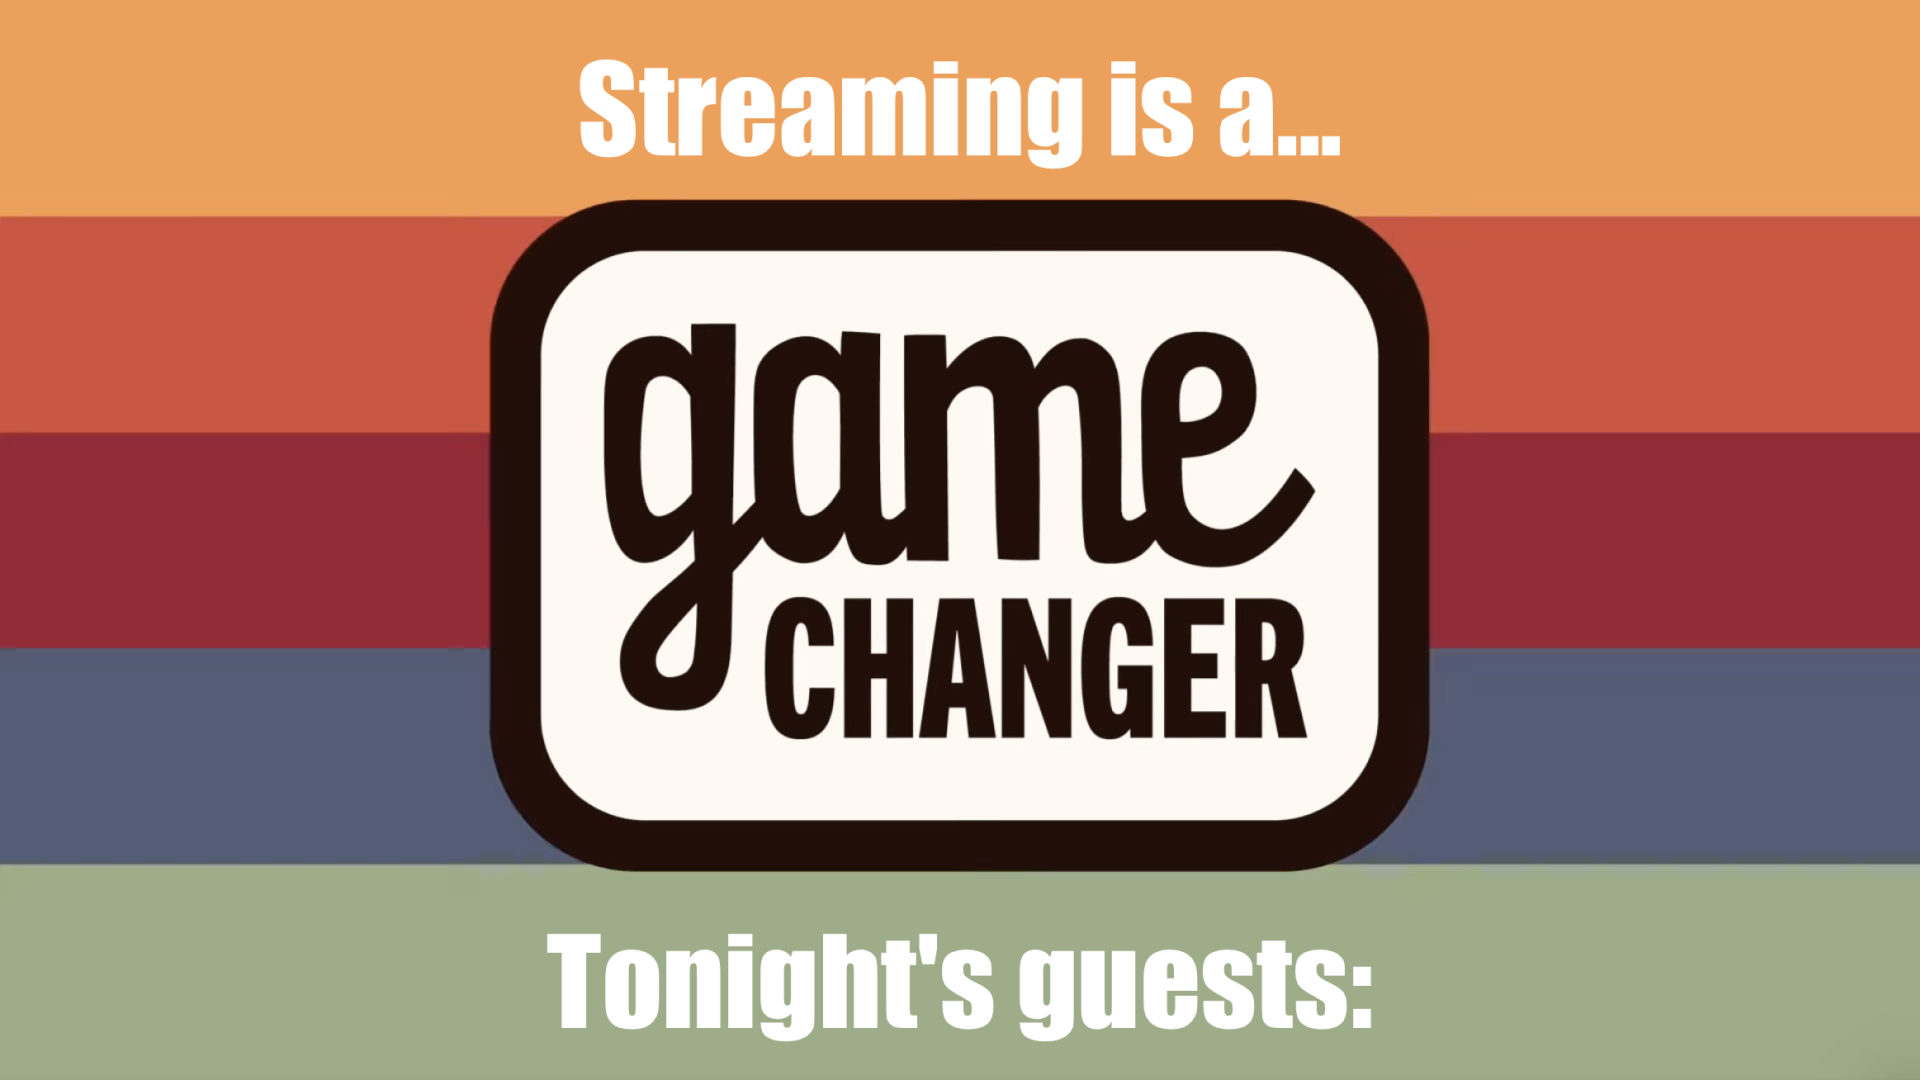 Screenshot of the show 'Game Changer' from CollegeHumor saying: Streaming is a game changer. Tonight's guests...